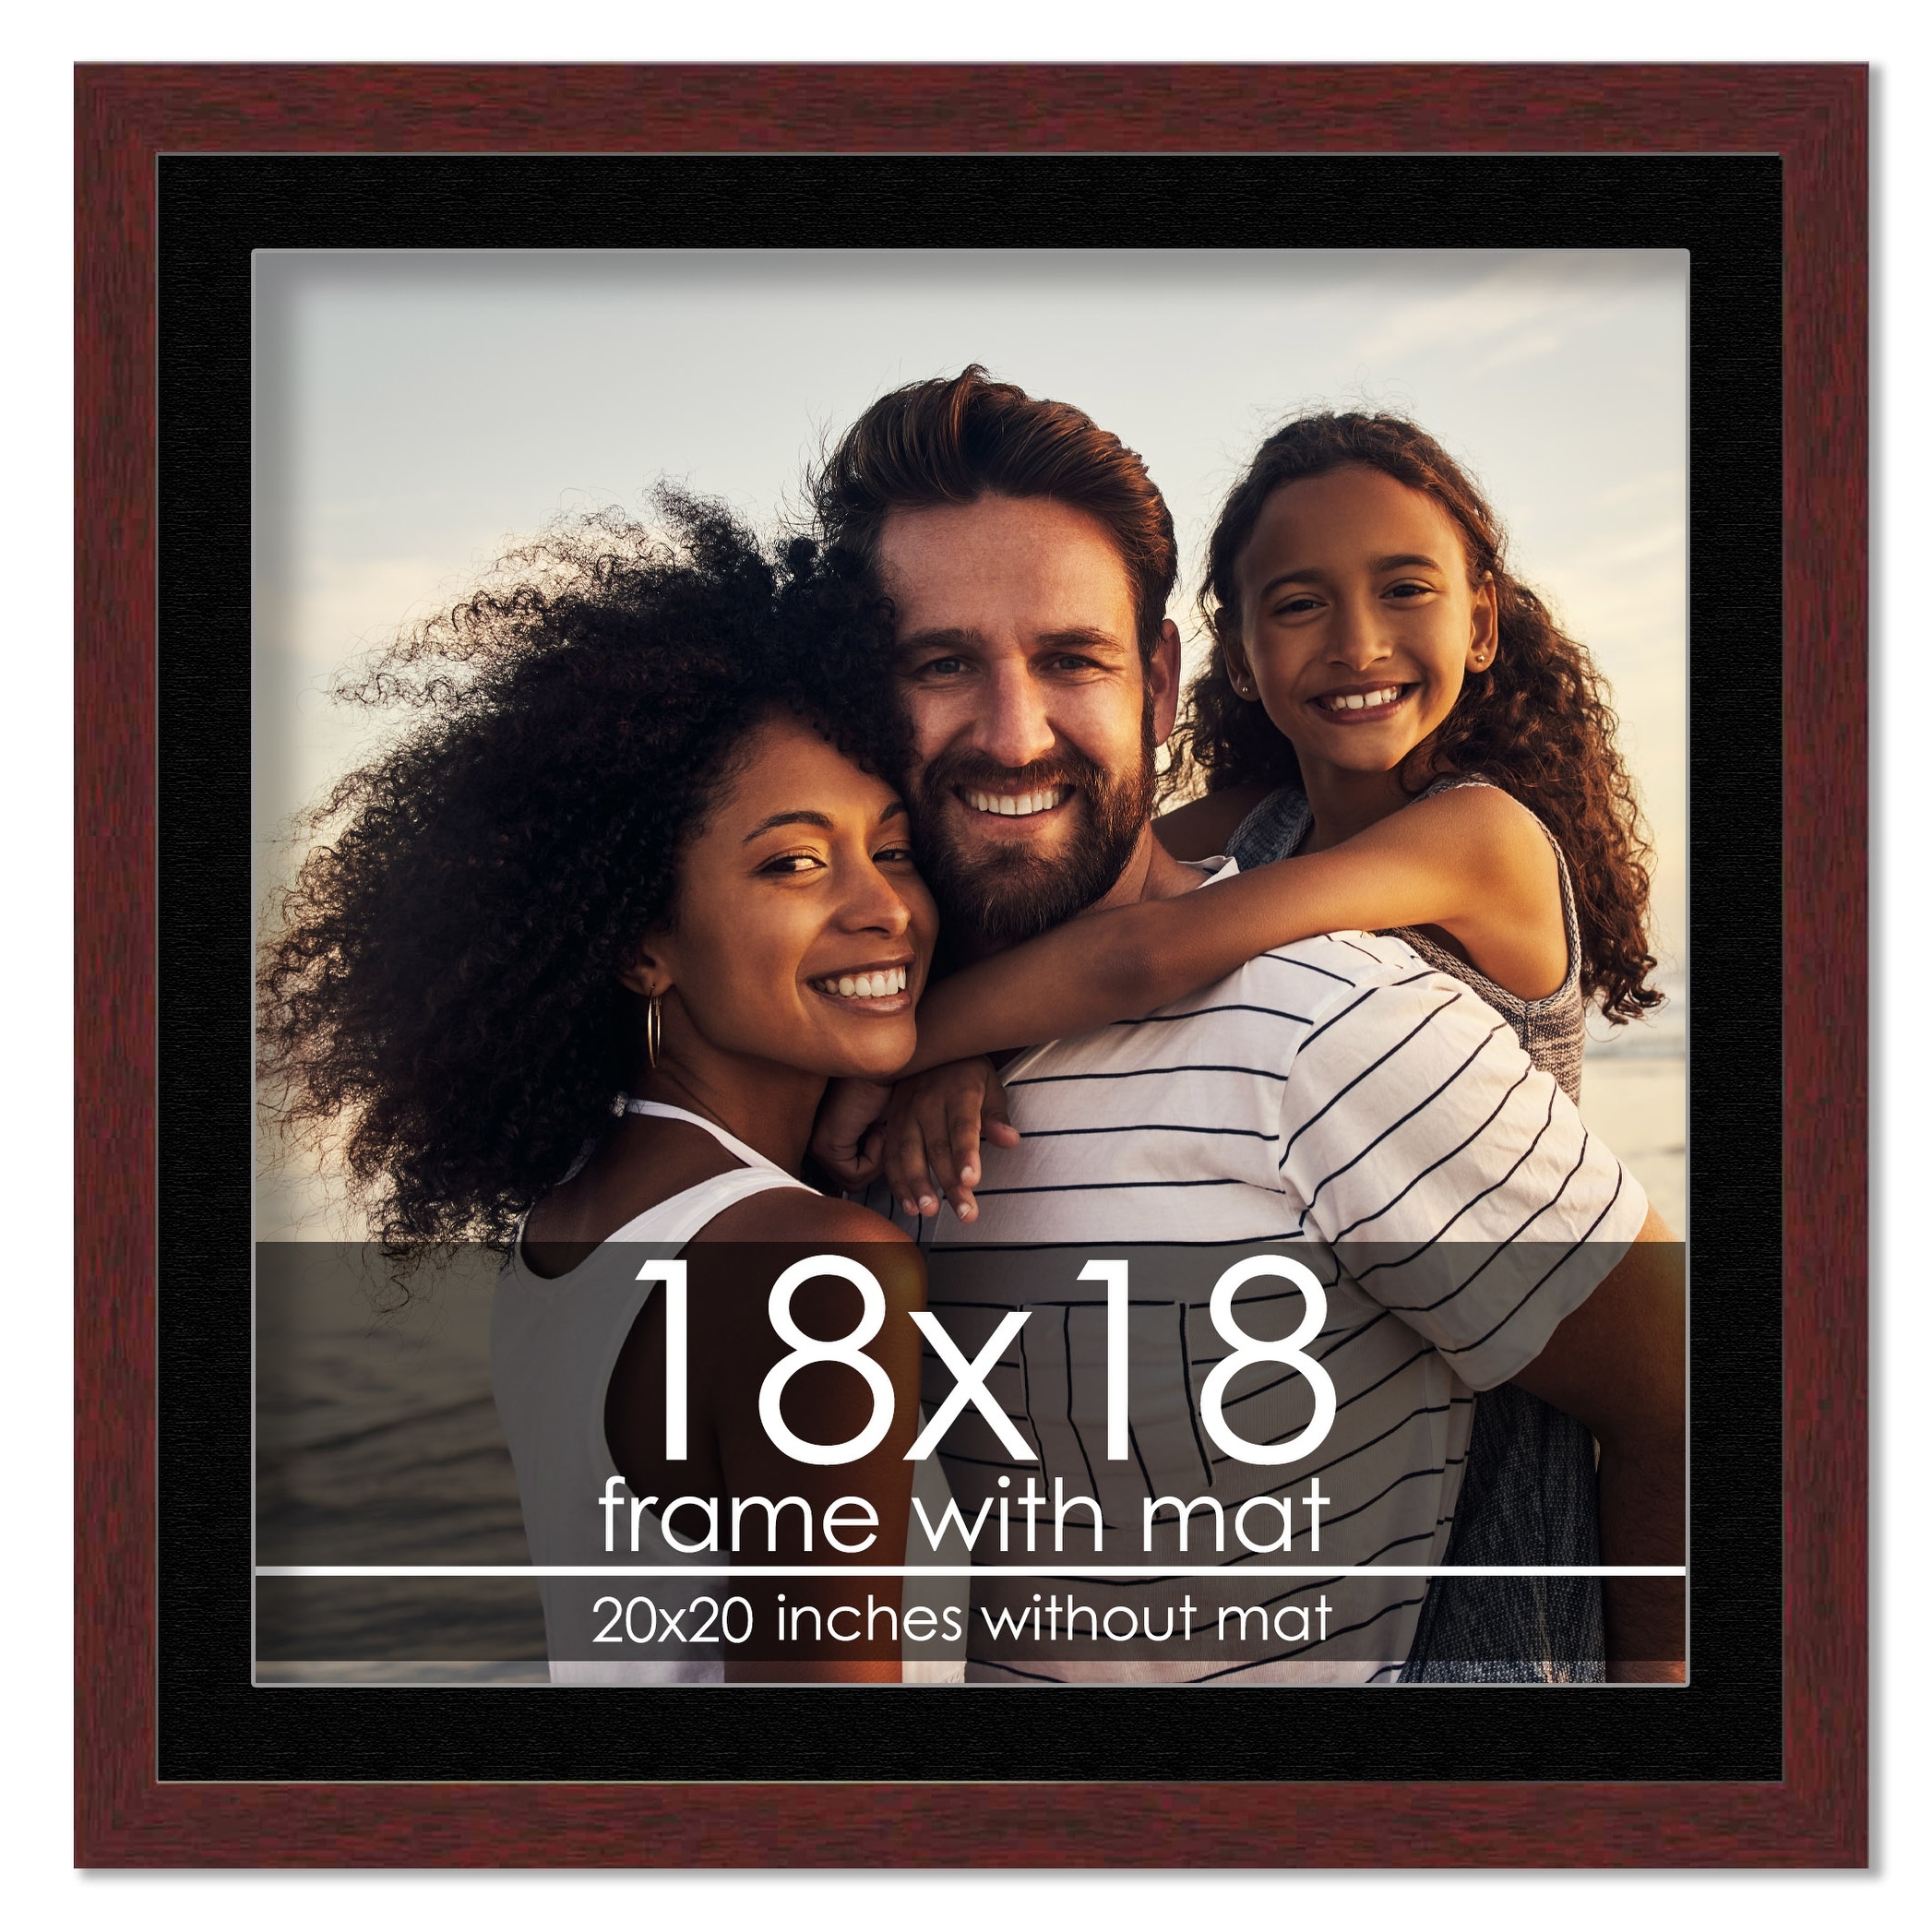 TWING 11x14 Picture Frames Set of 6,Display Photos 8x10 with Mat or 11x14  without Mat,Home Decorative Wall Gallery Picture Photo Frame Wood